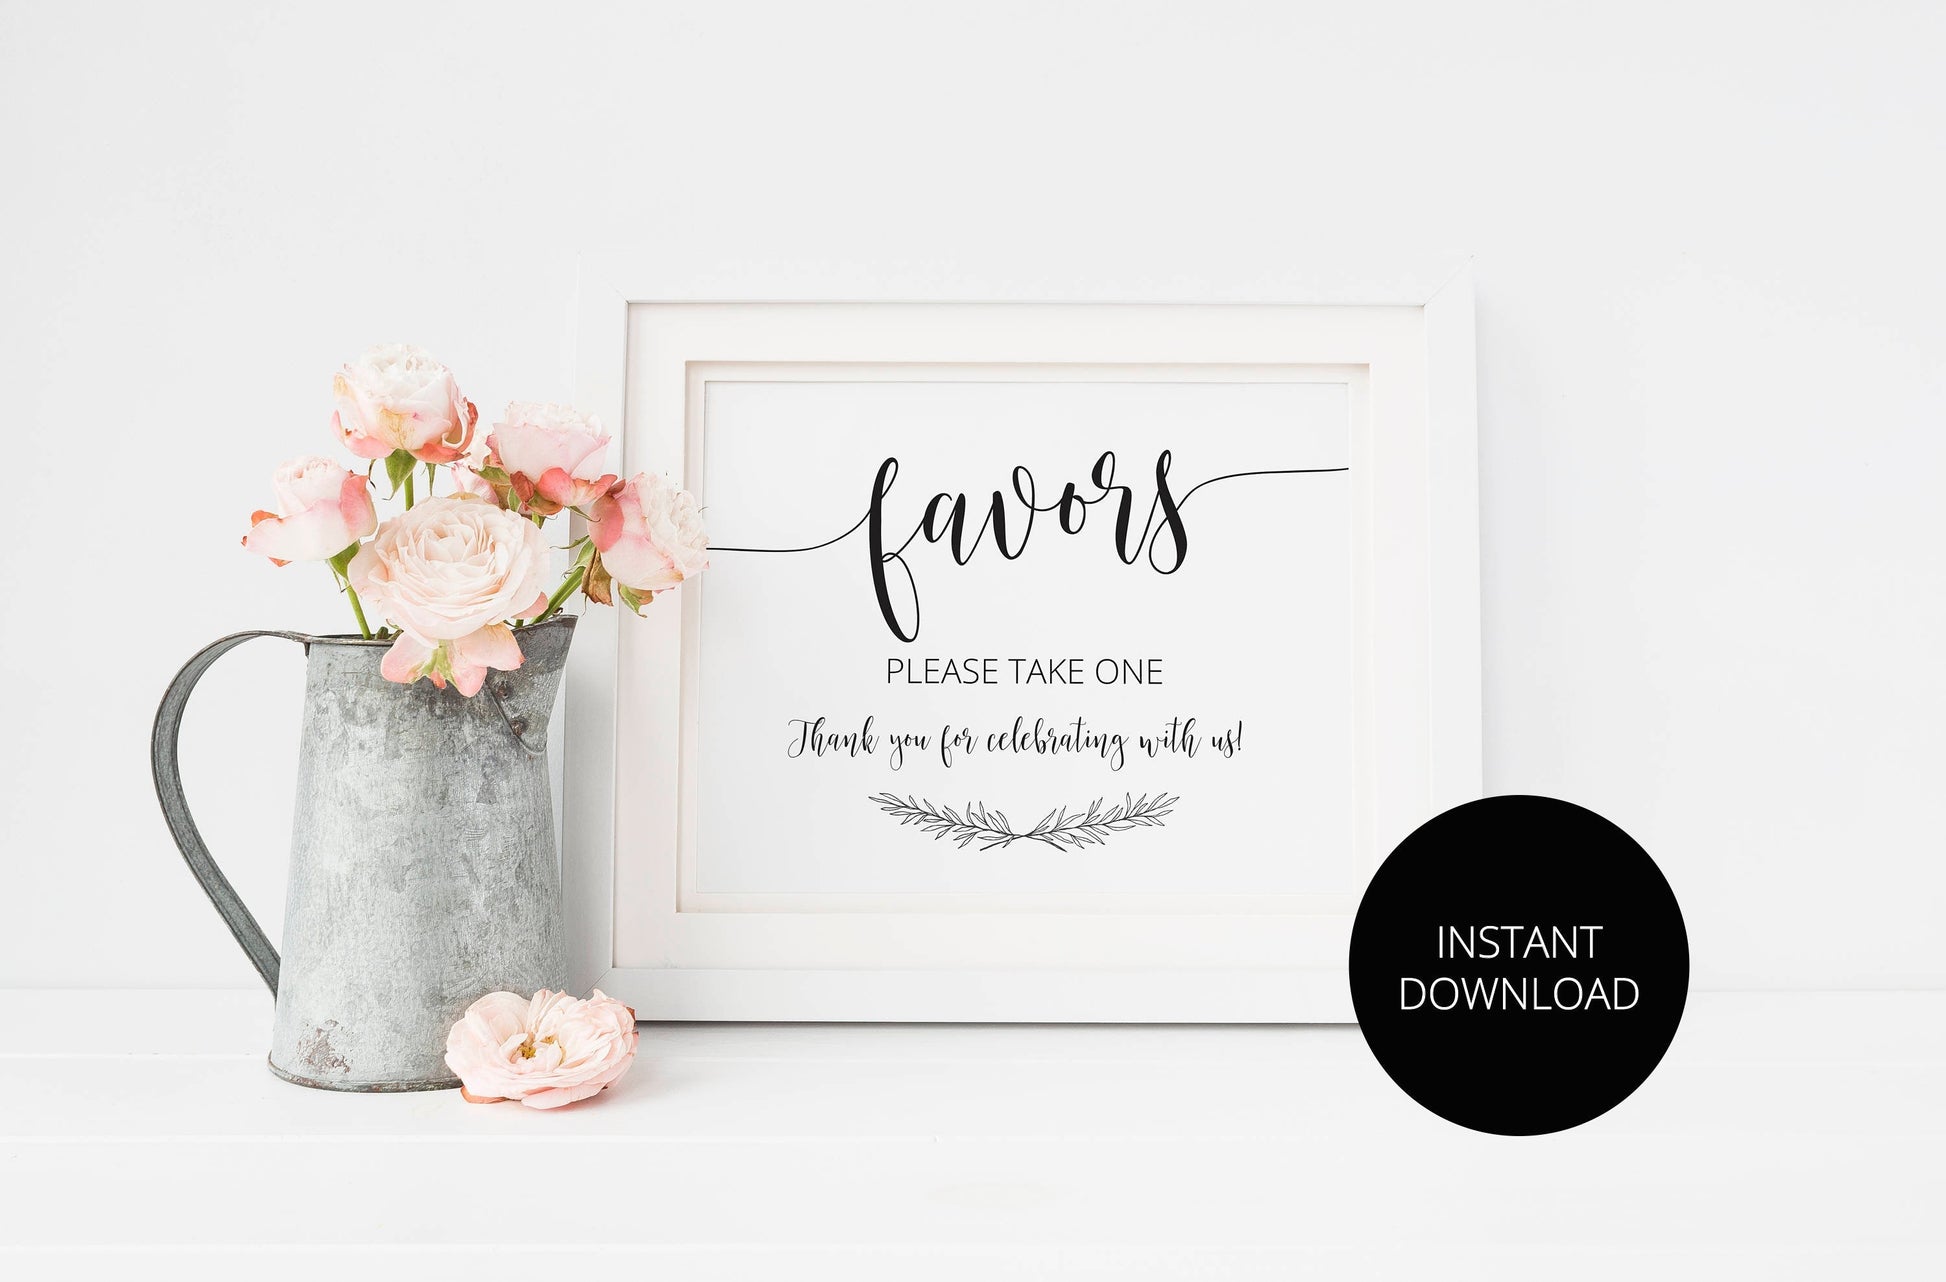 Wedding Favor Sign, Wedding Favors Sign, Wedding Printable, Please Take One, Rustic Wedding, Wedding sign - April SIGNS | PHOTO BOOTH SAVVY PAPER CO